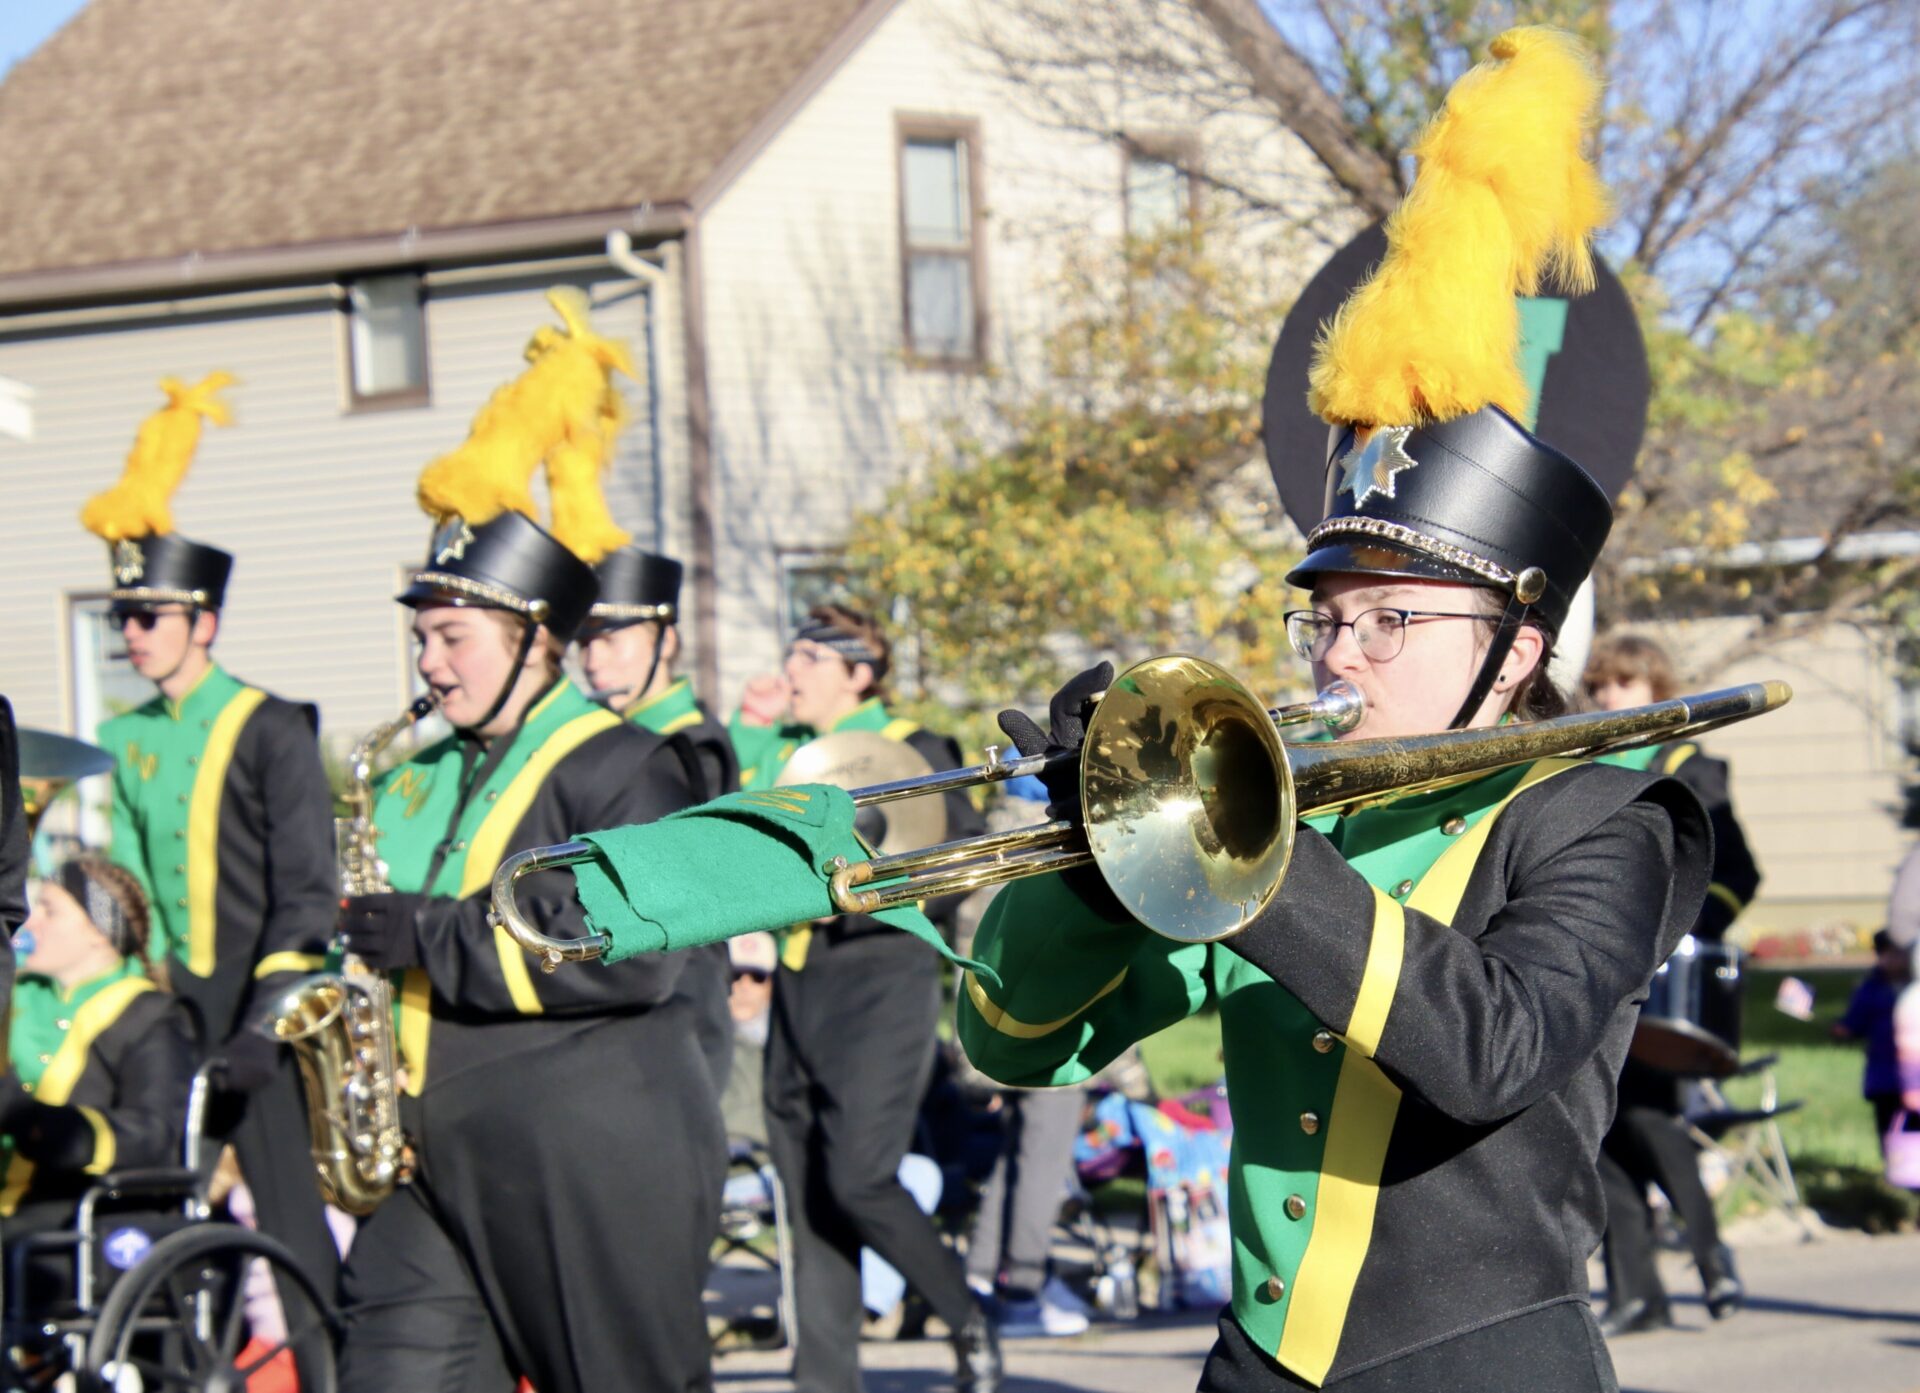 The Northwestern band was one of 18 marching bands in the Northern State homecoming parade on Saturday, Oct. 7. Aberdeen Insider photo by Scott Waltman